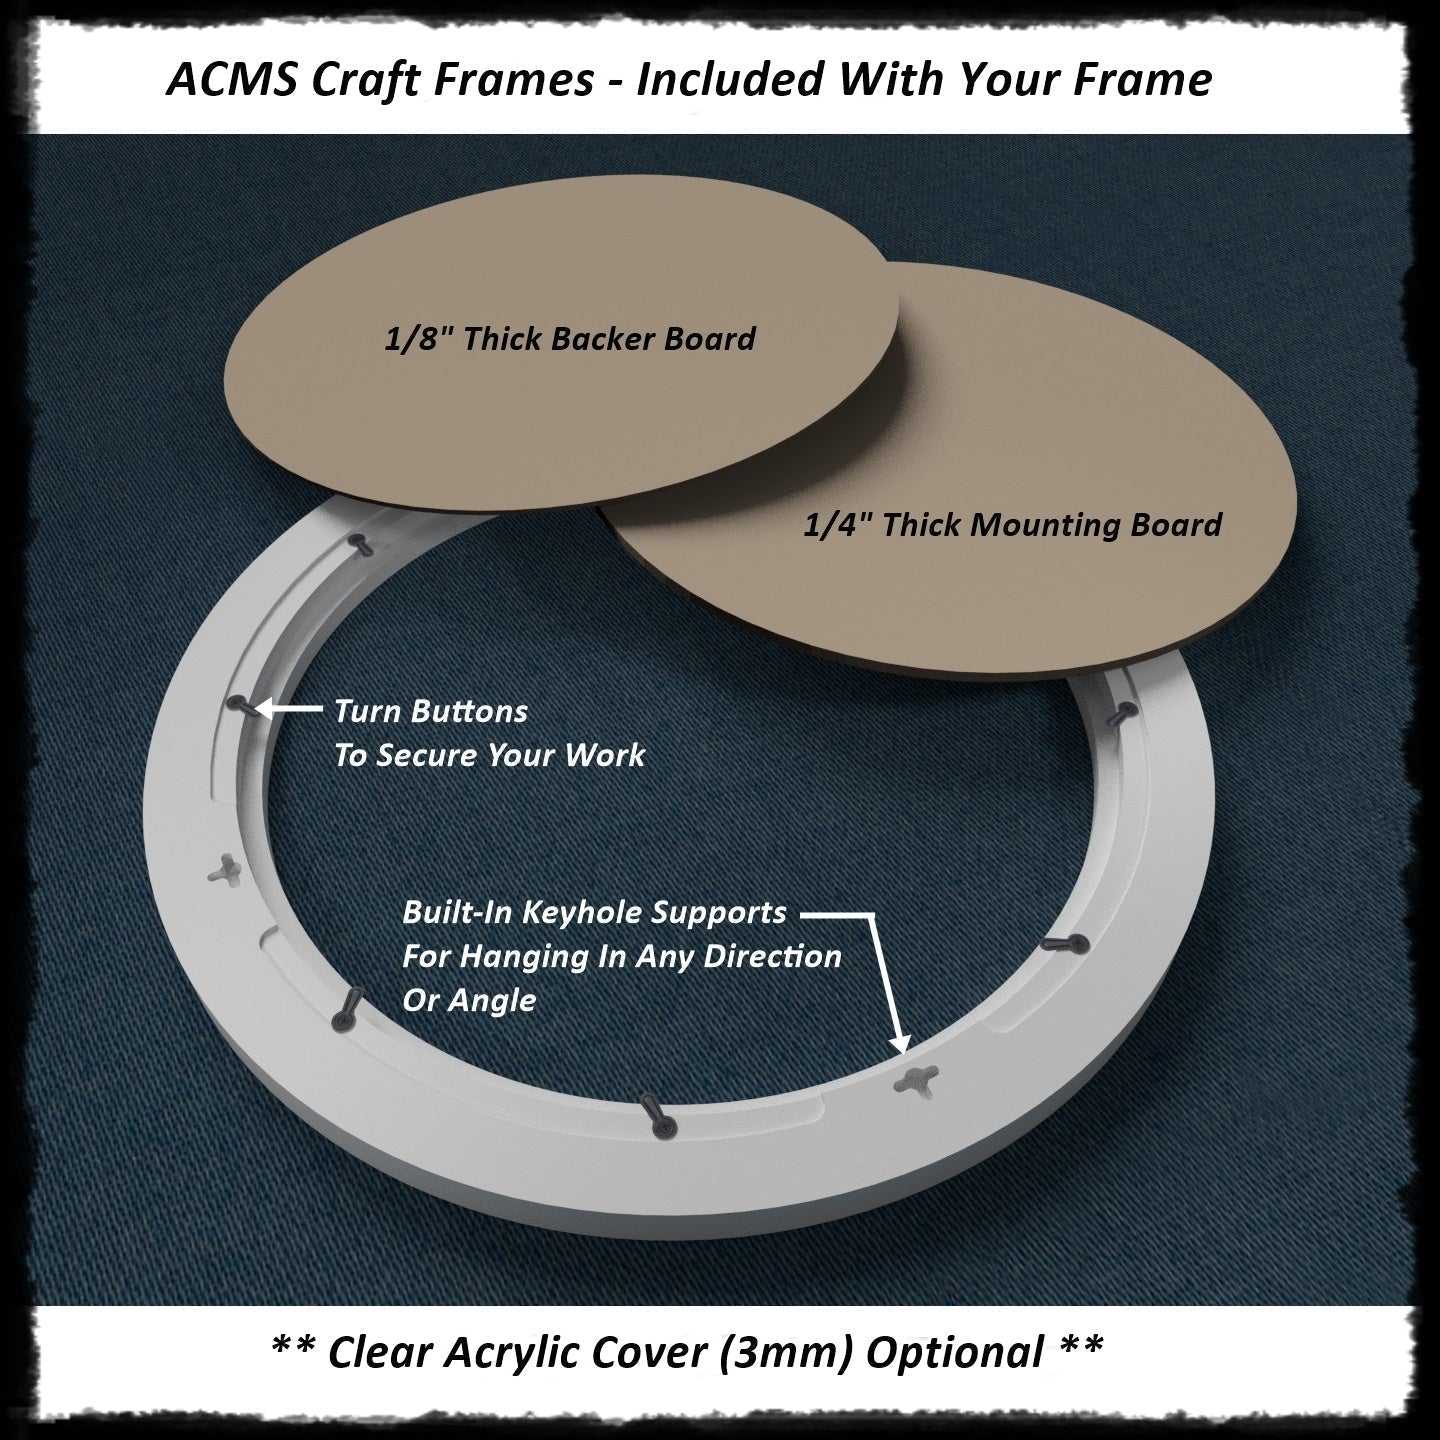 Oval Craft Frame - FLAT Profile - 3" Frame Width - 1" Thick